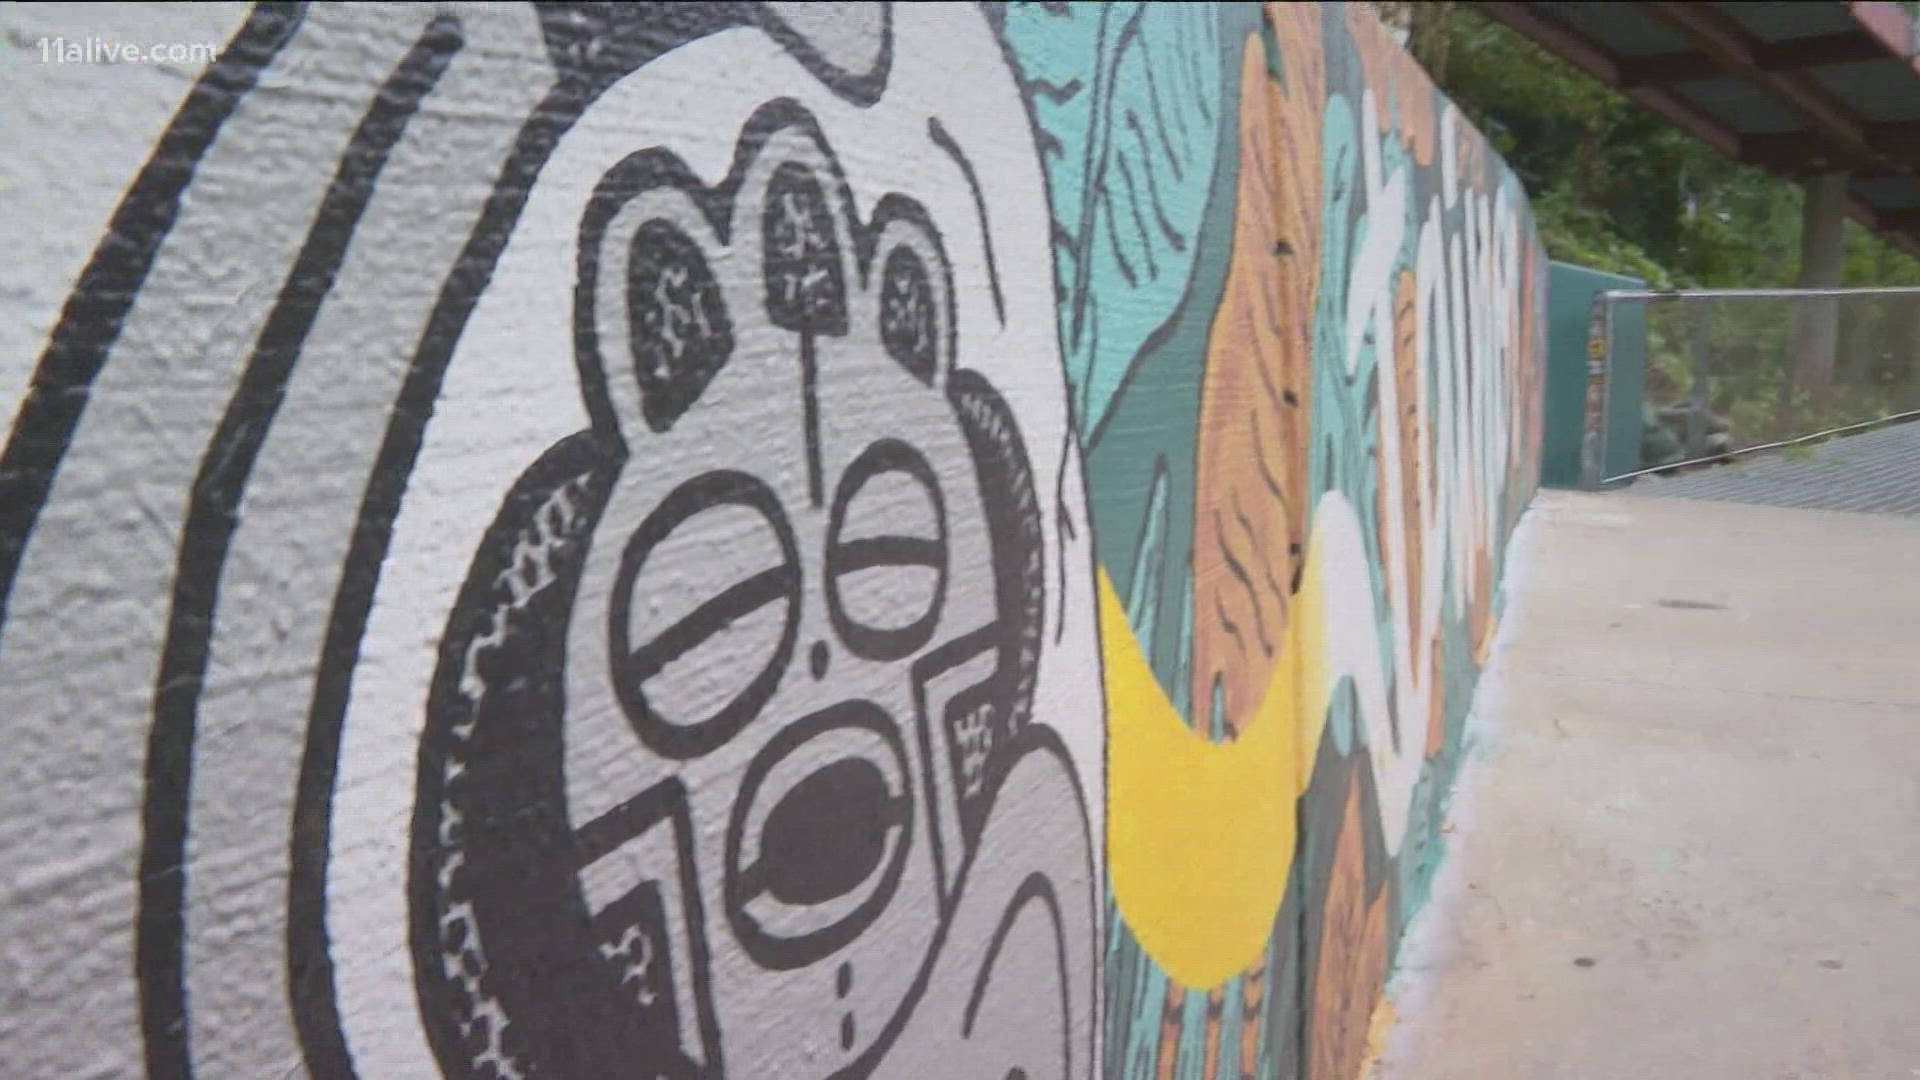 For about three months, Lisette Correa worked to display Puerto Rican history on the BeltLine walls.